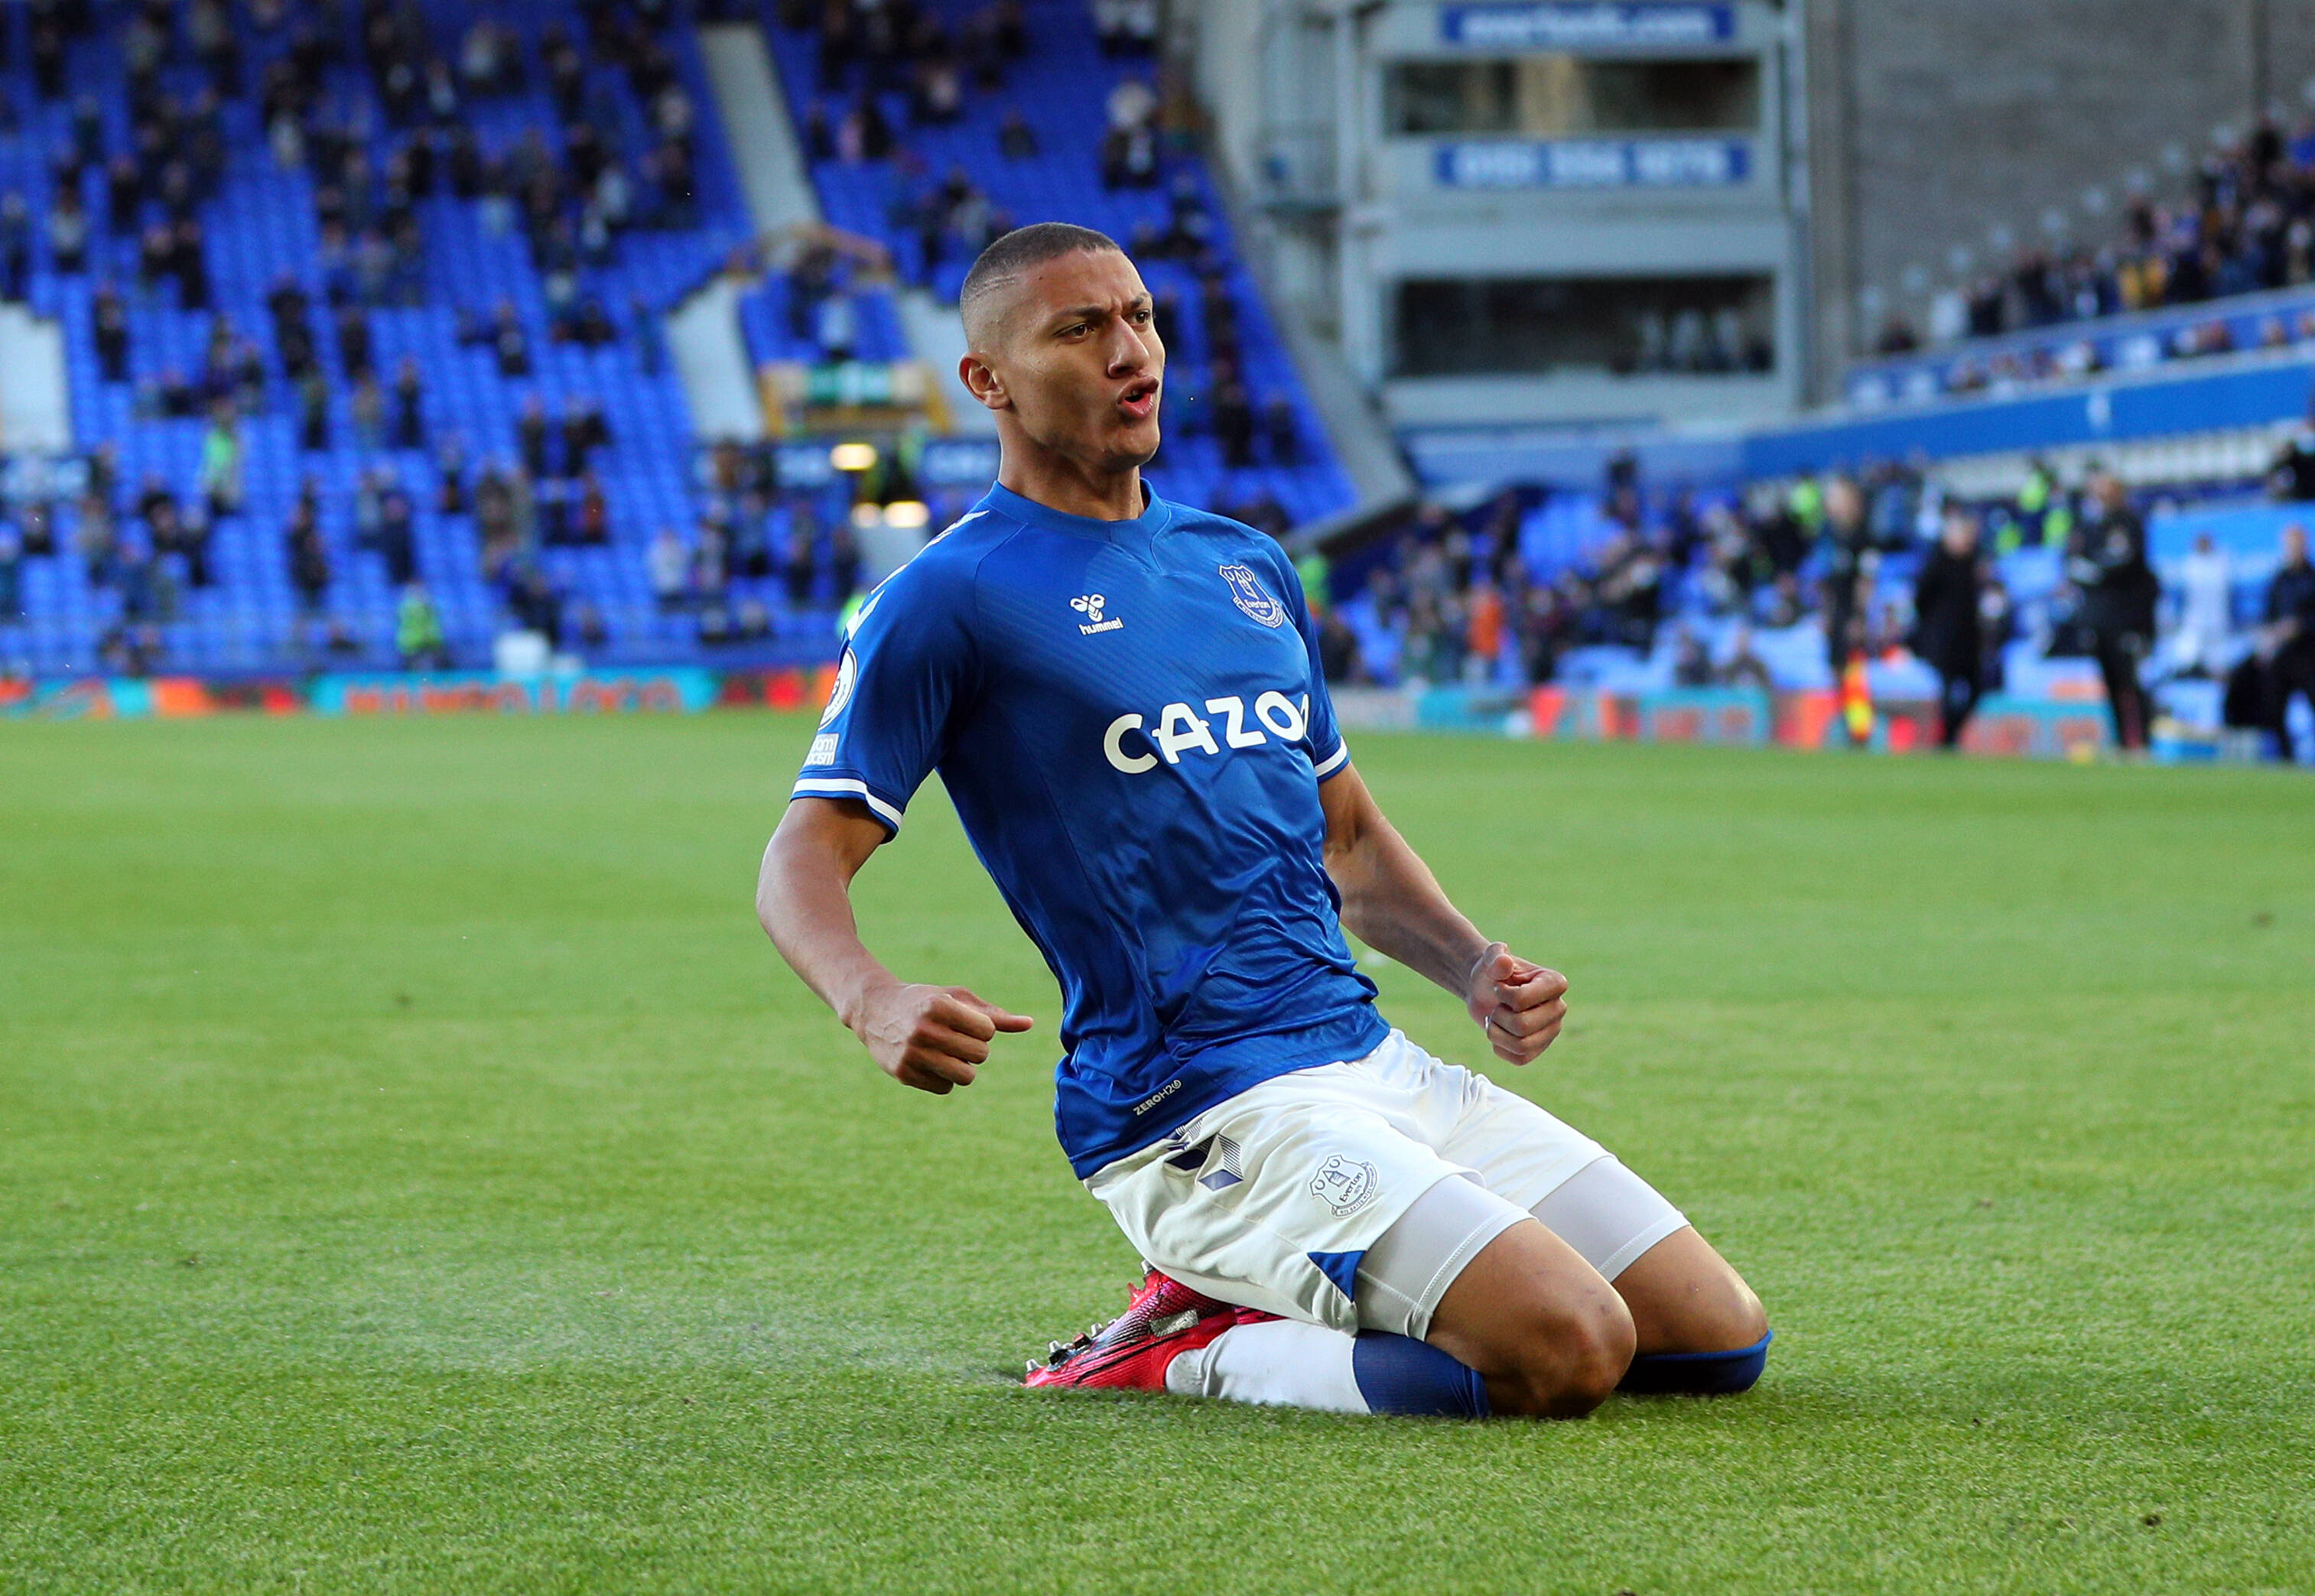 Fabrizio Romano provides latest update on a potential switch for Everton’s Richarlison to Real Madrid